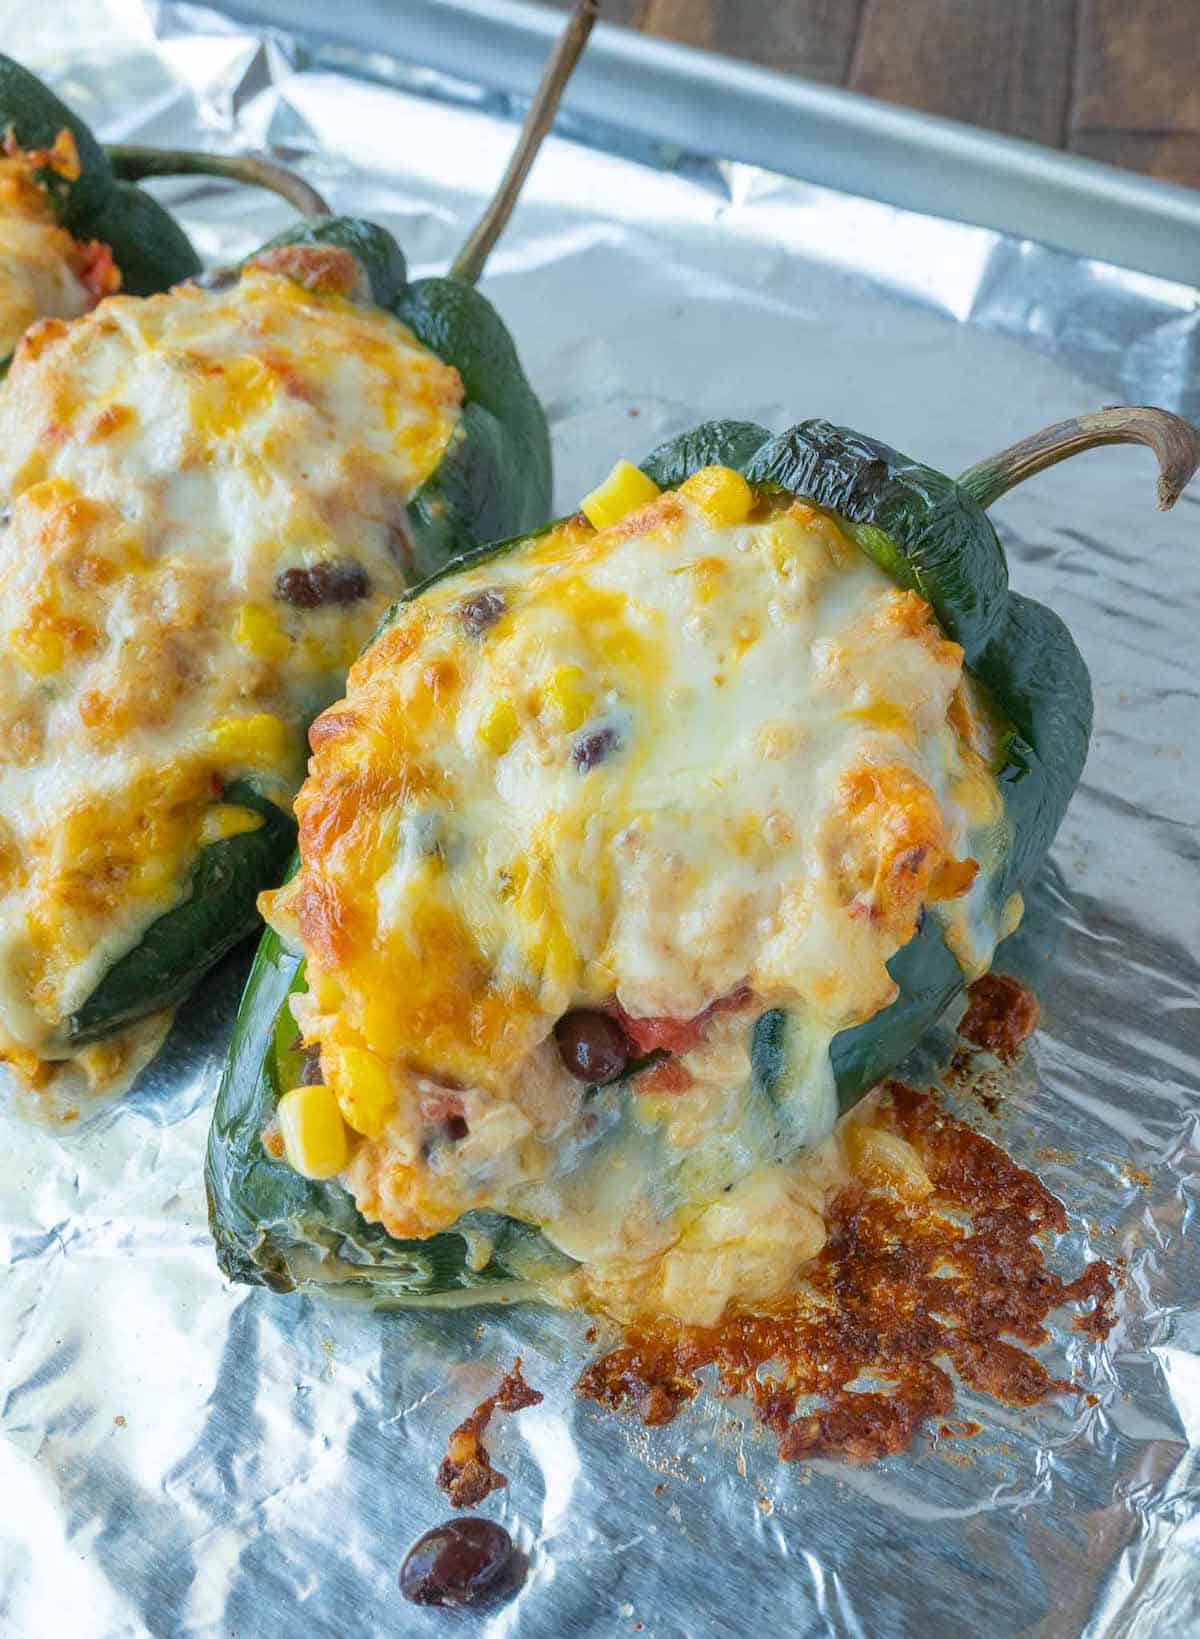 Stuffed poblano peppers on a baking sheet.